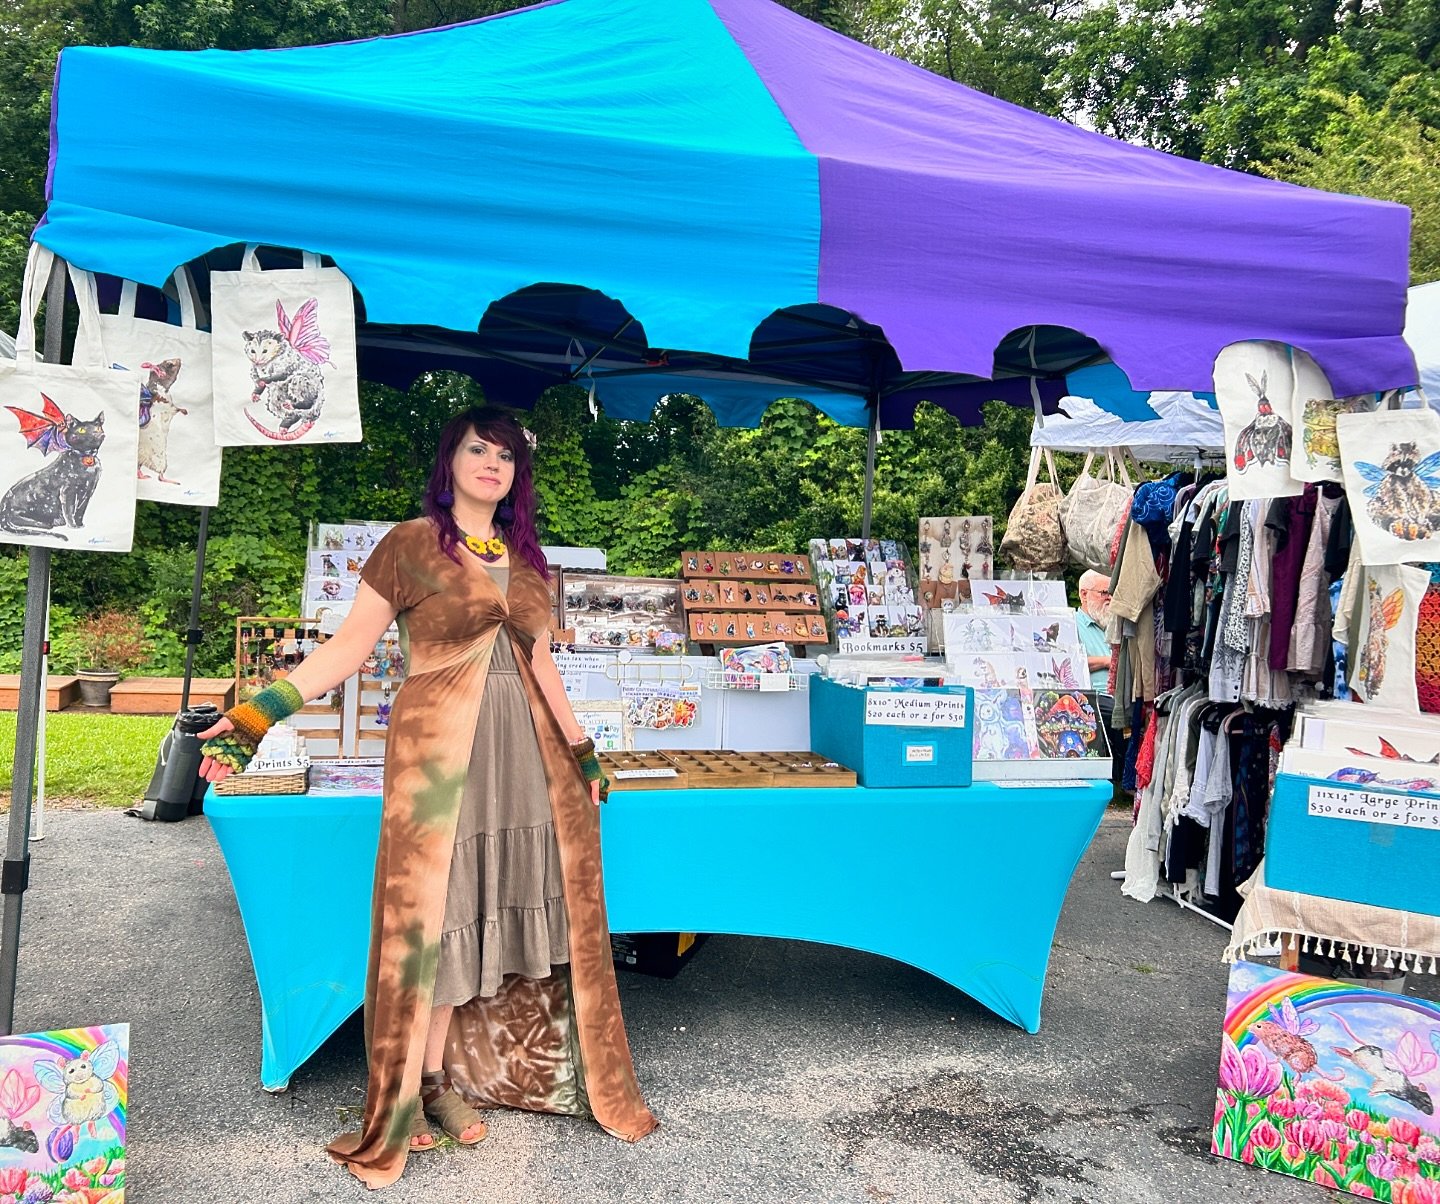 Because I keep forgetting to get photos of me actually next to my booth so here we go set up for @floraandfaunamarketsc Magic Mushroom Market! ✨🍄🍄&zwj;🟫✨